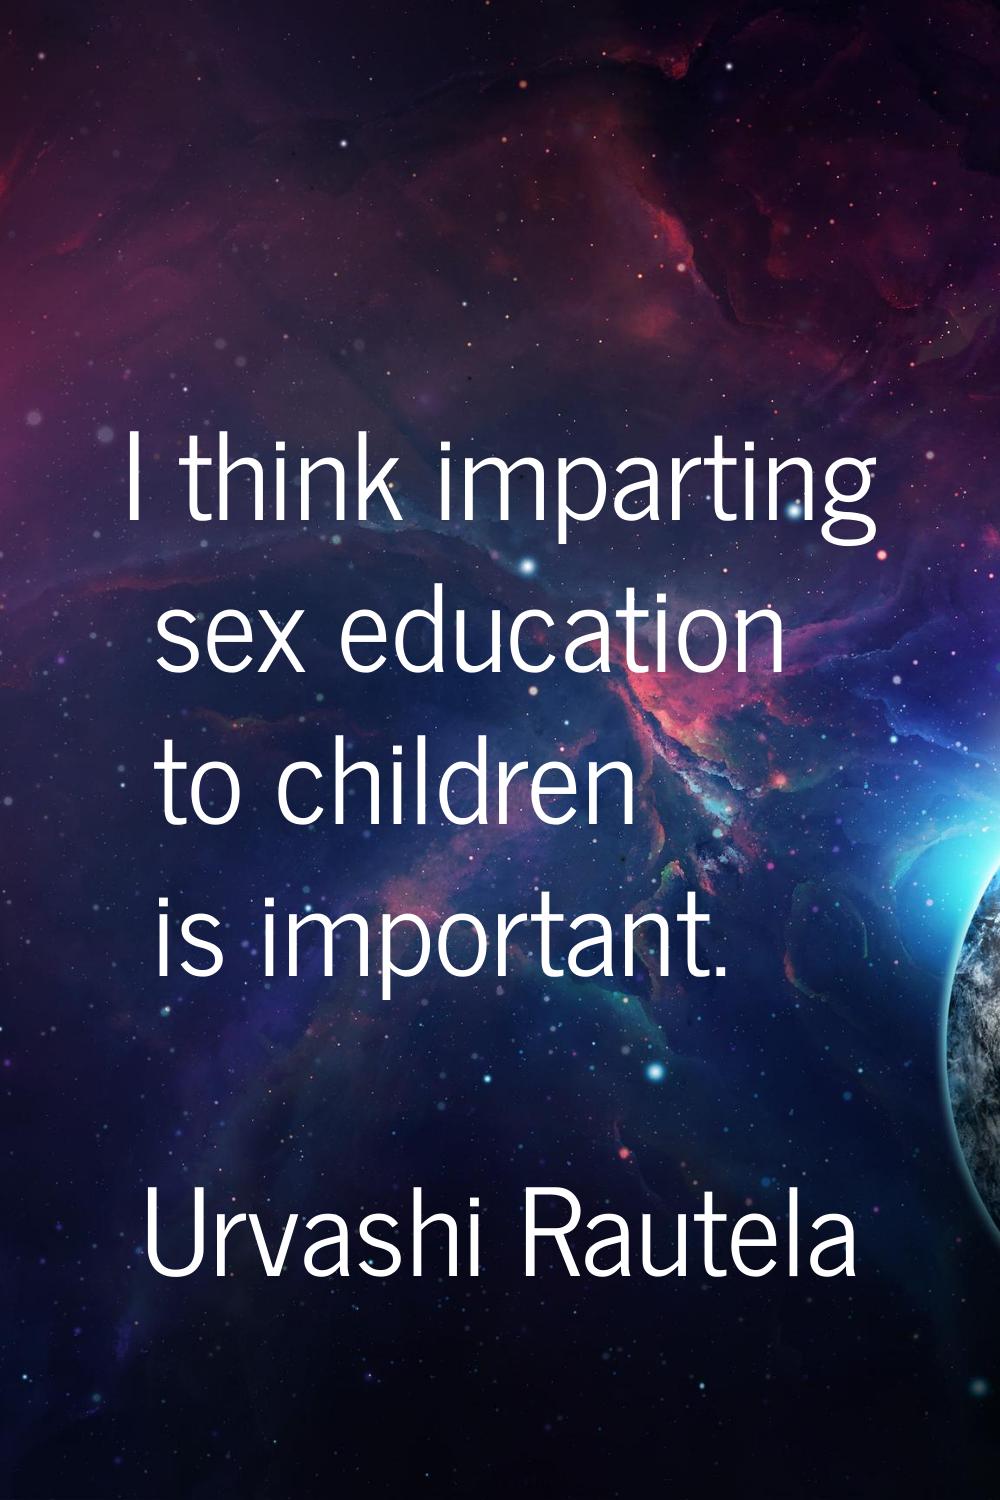 I think imparting sex education to children is important.